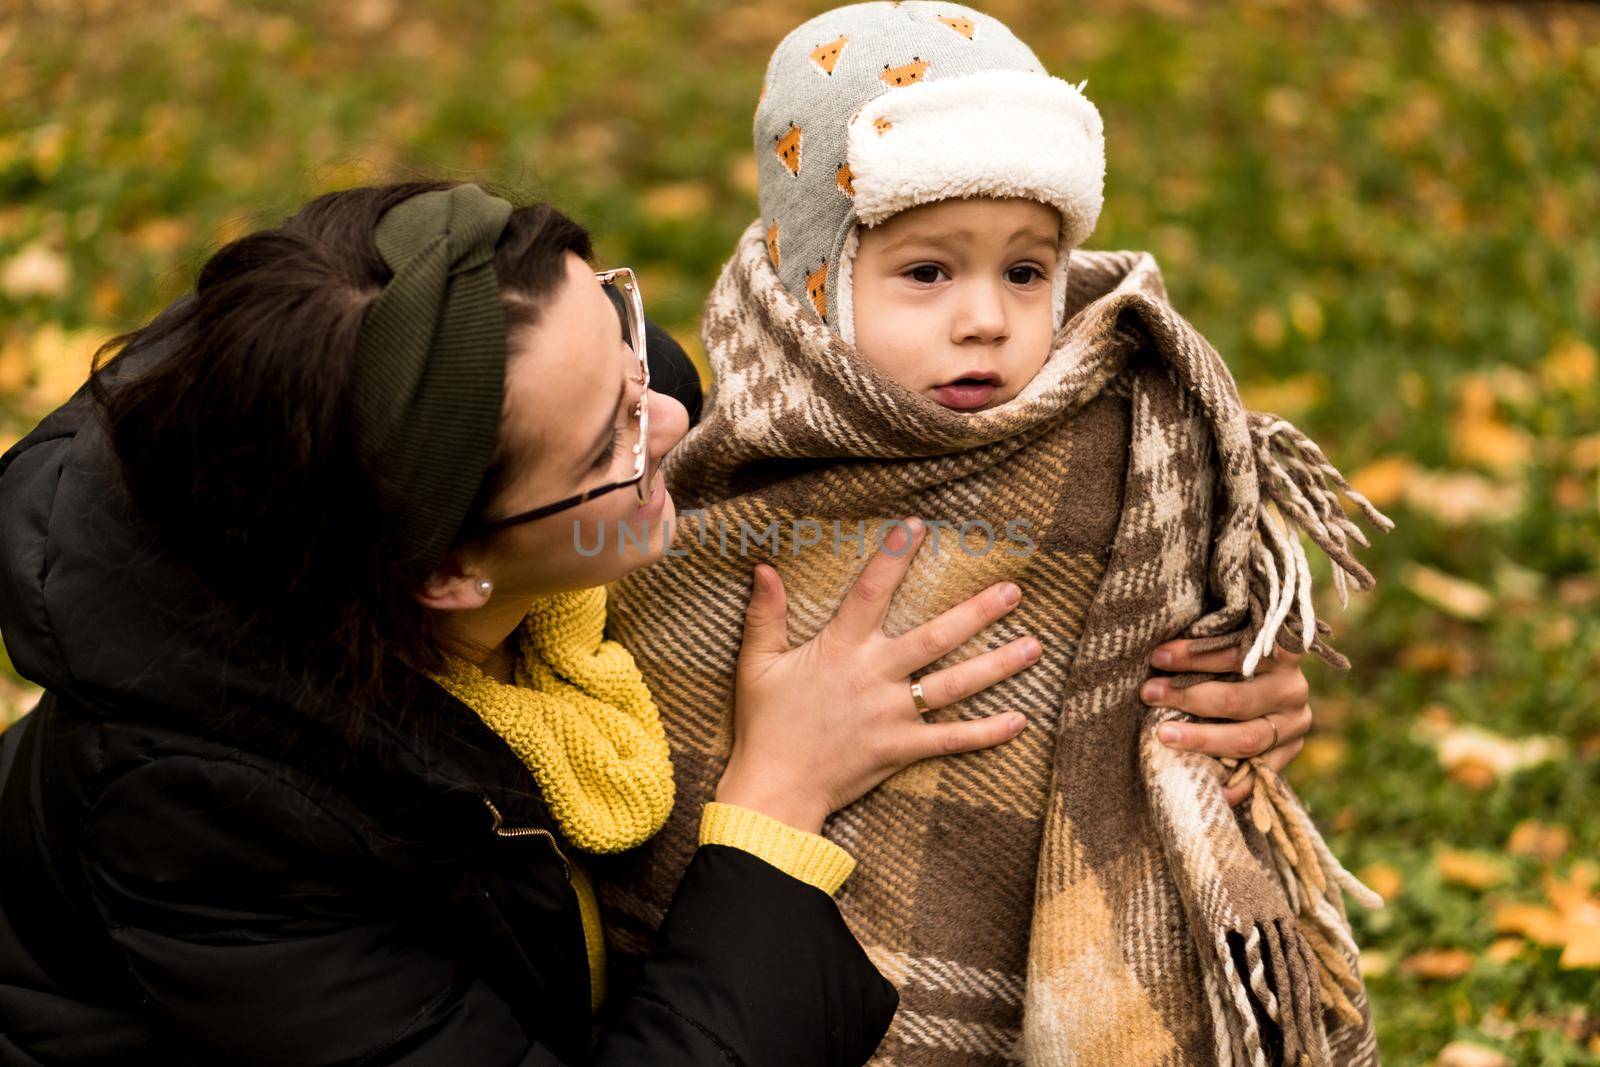 Young Woman Mom And Little Cute Preschool Minor Baby Boy In Orange Plaid At Yellow Fallen Leaves Nice Smiling Look At Camera In Cold Weather In Fall Park. Childhood, Family, Motherhood, Autumn Concept by mytrykau